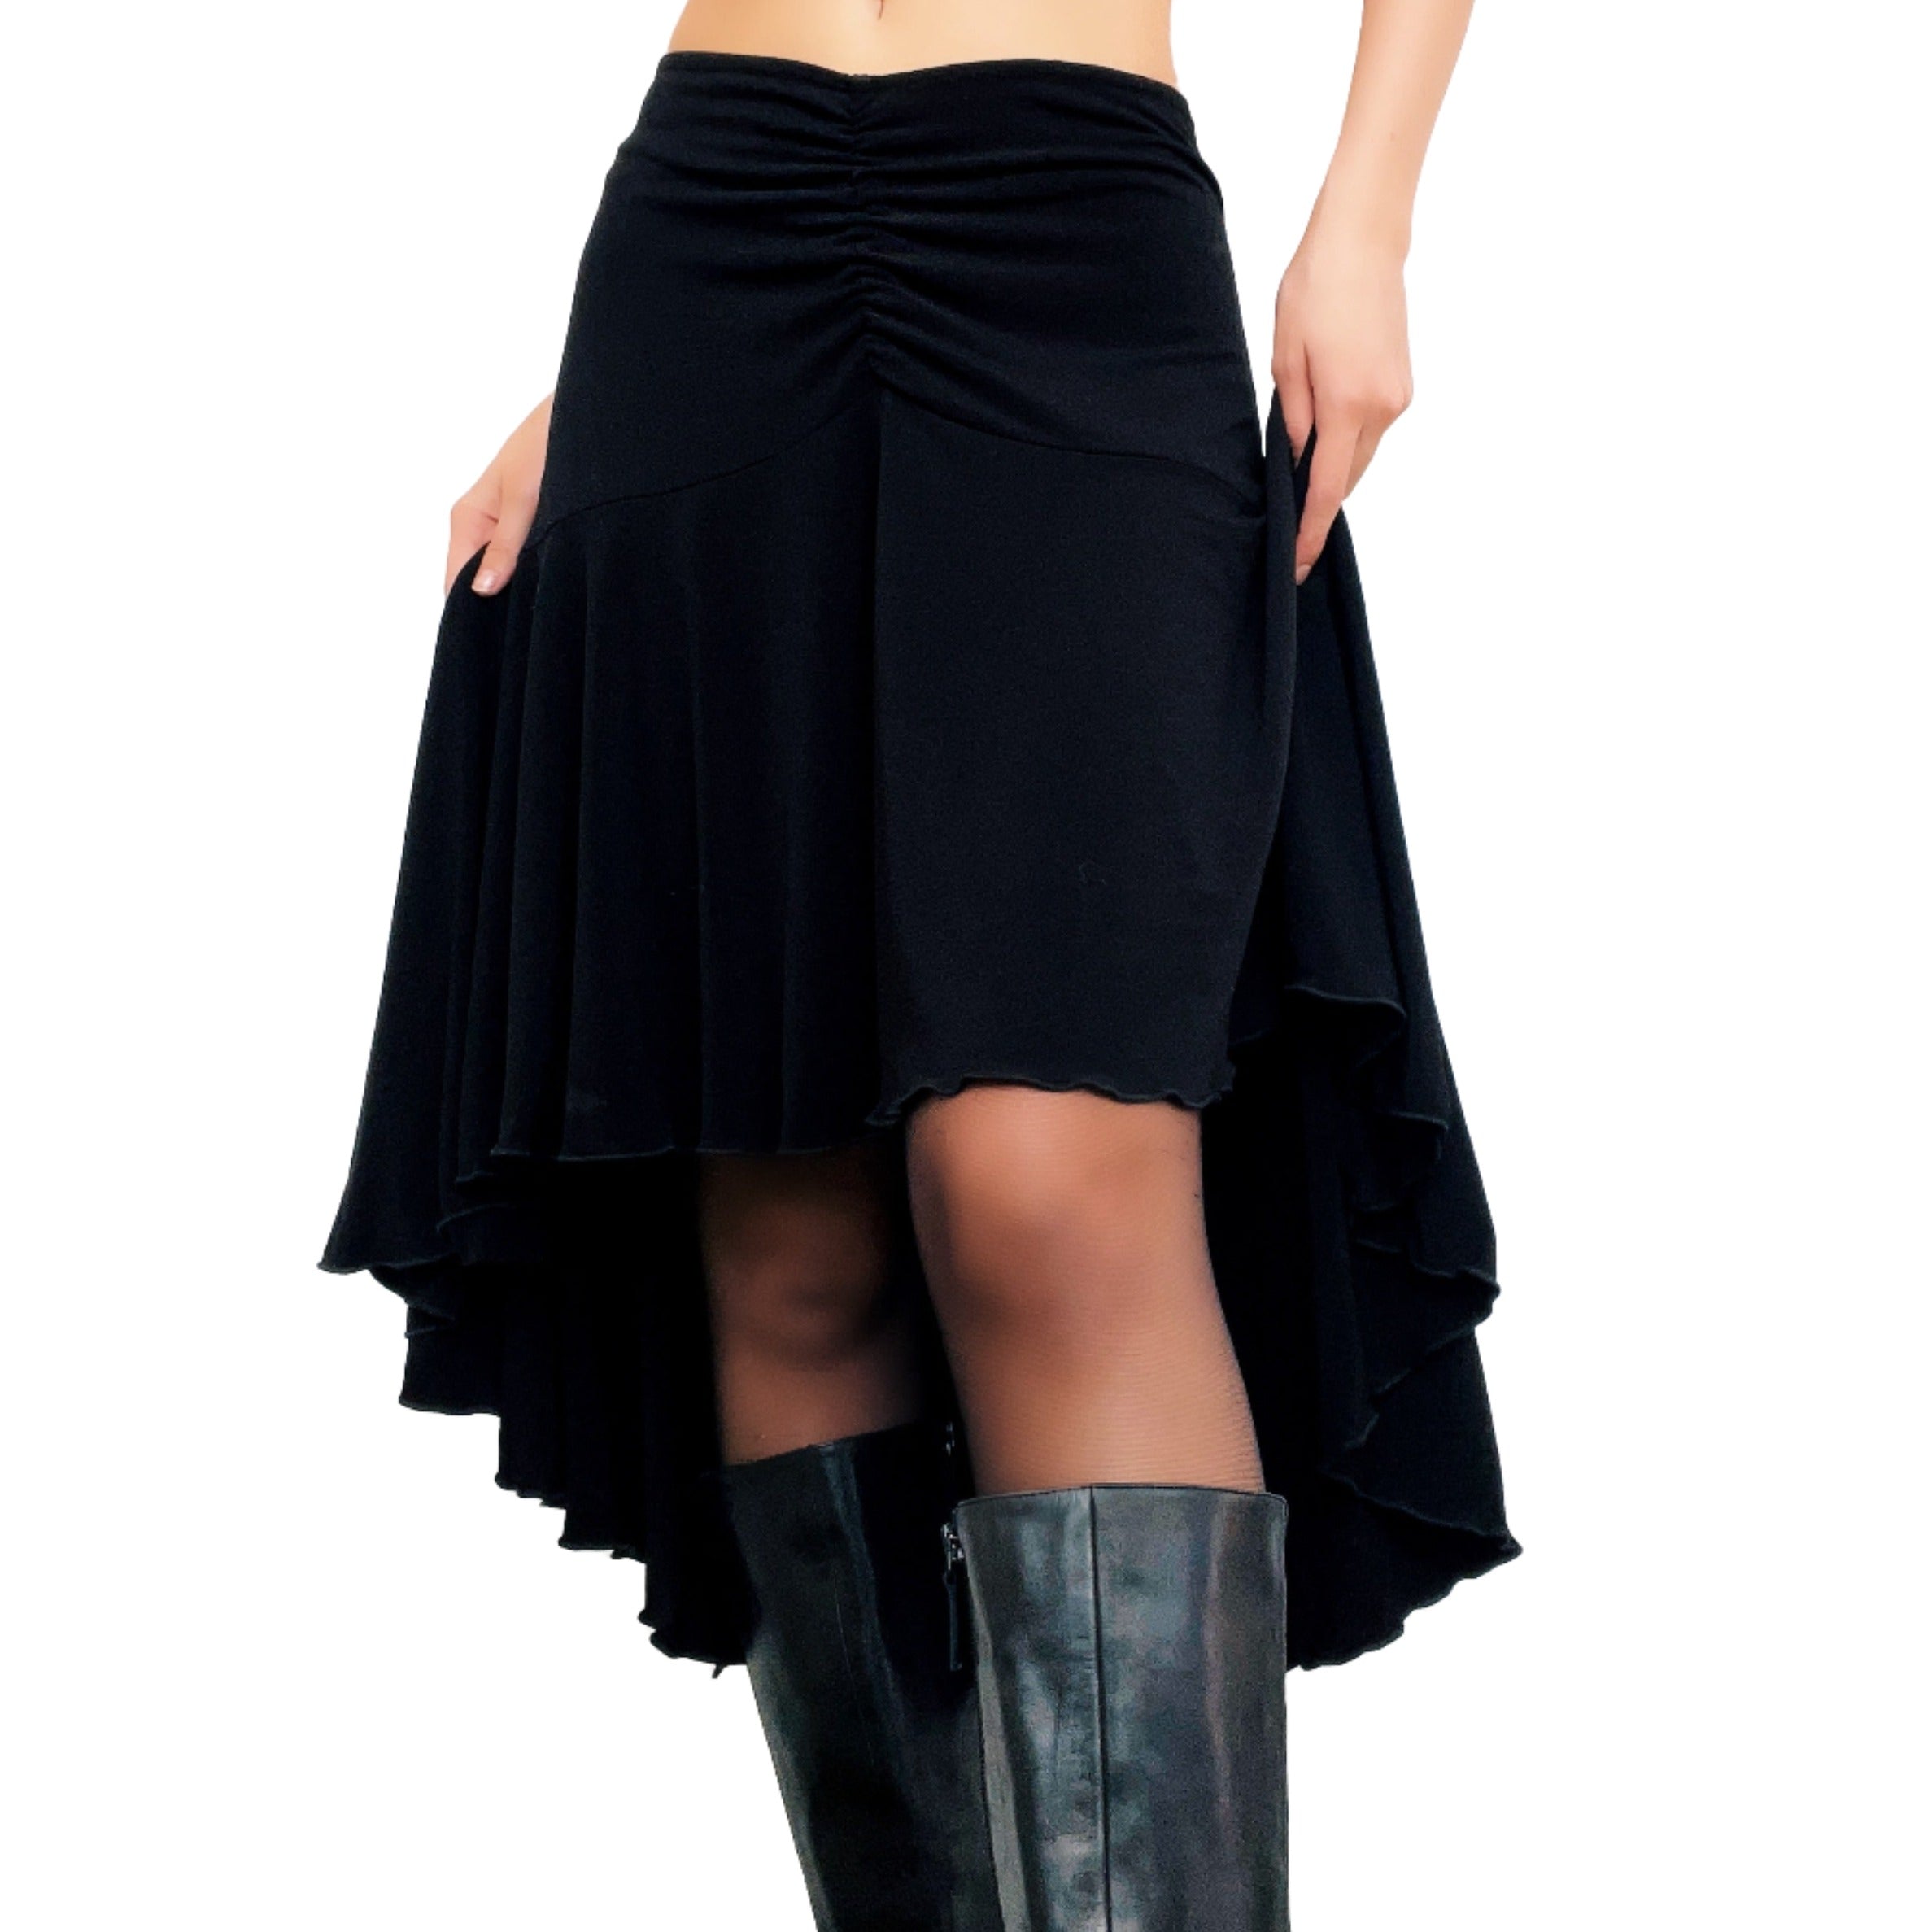 Early 2000s Ruched Black Midi Skirt (M)